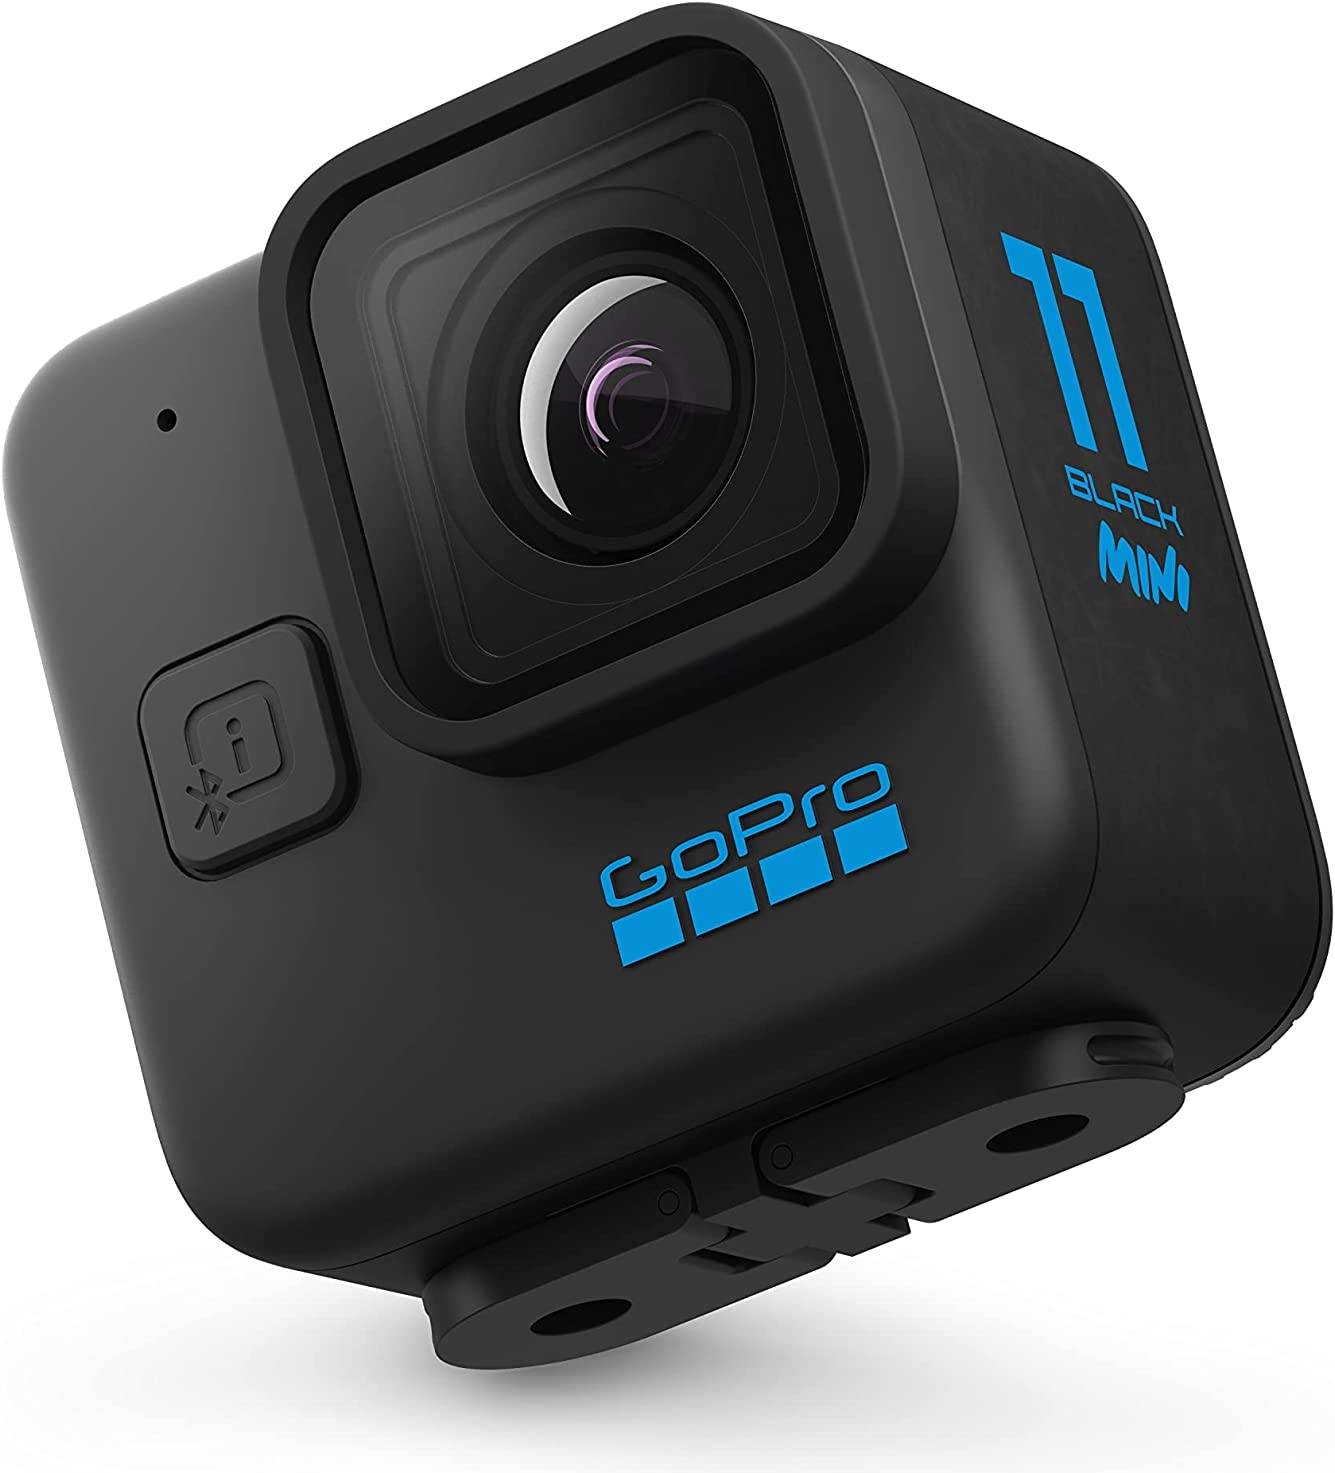 GoPro HERO 11 Black Mini Compact Waterproof Action Camera with 5.3K60 Ultra HD Video, 24.7MP Frame Grabs, 1/1.9